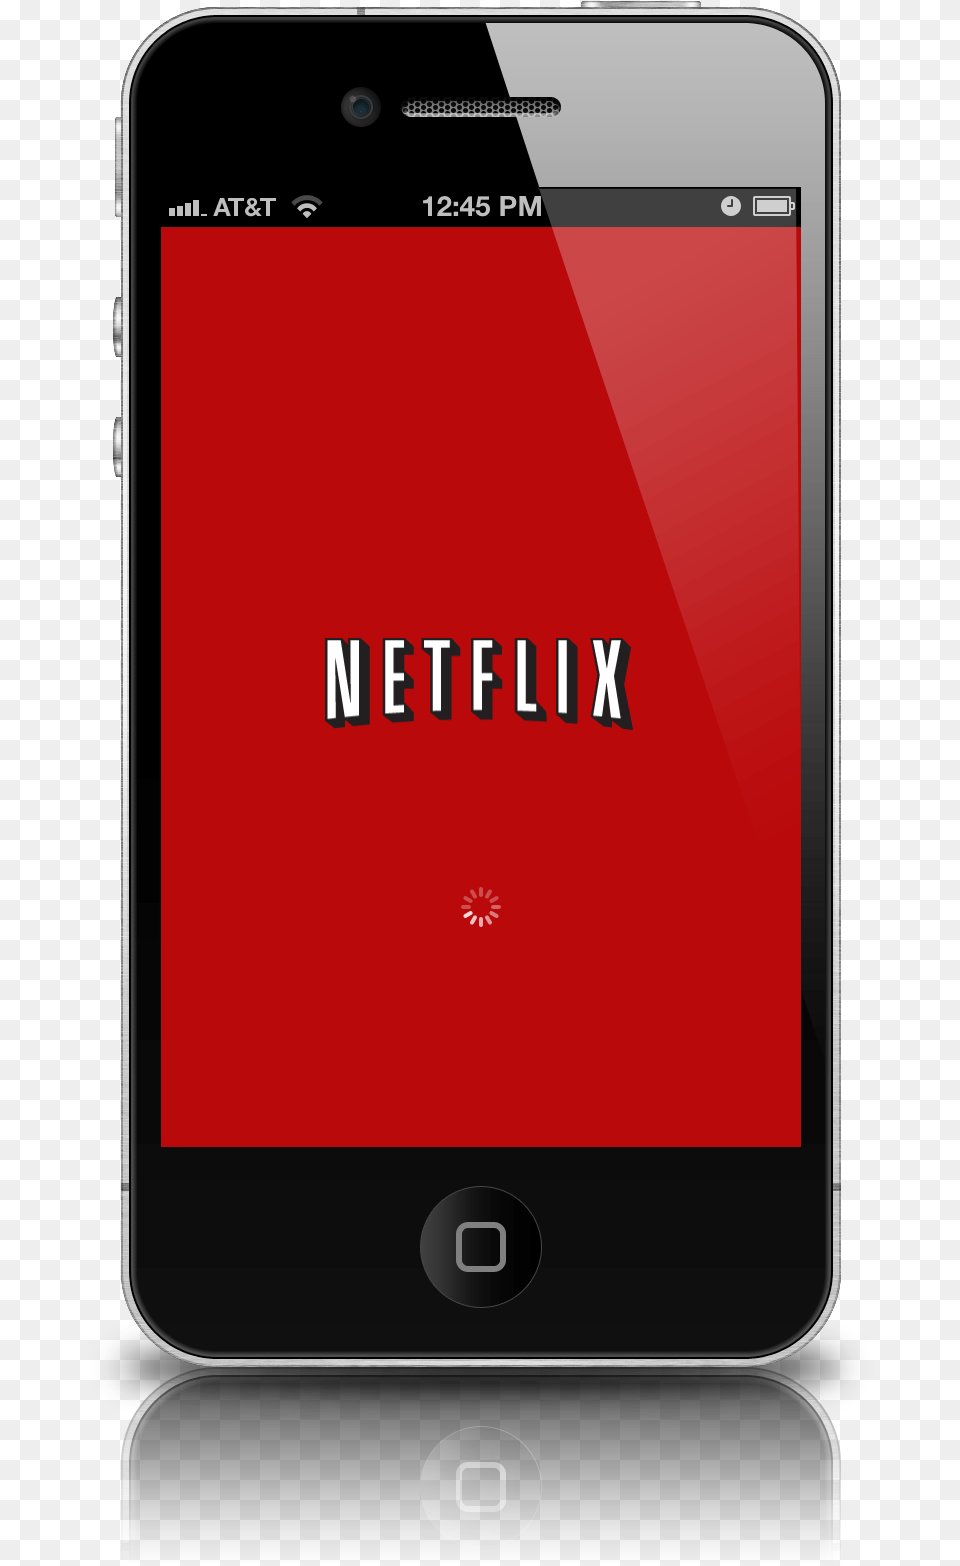 Netflix Iphone App Icon Iphone With Netflix, Electronics, Mobile Phone, Phone Free Png Download